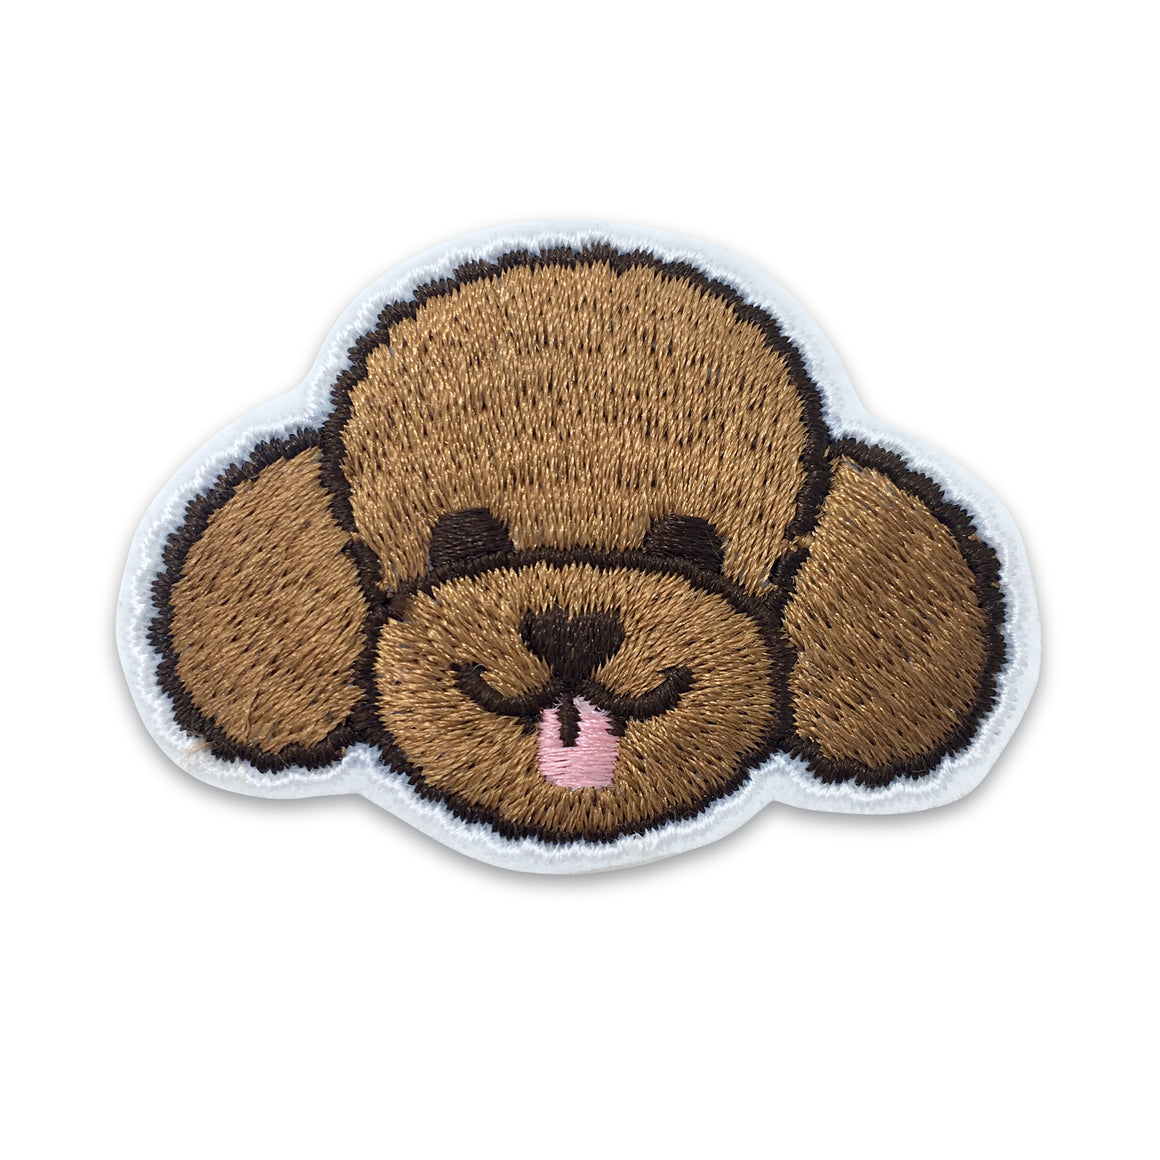 POODLE IRON ON EMBROIDERED PATCH